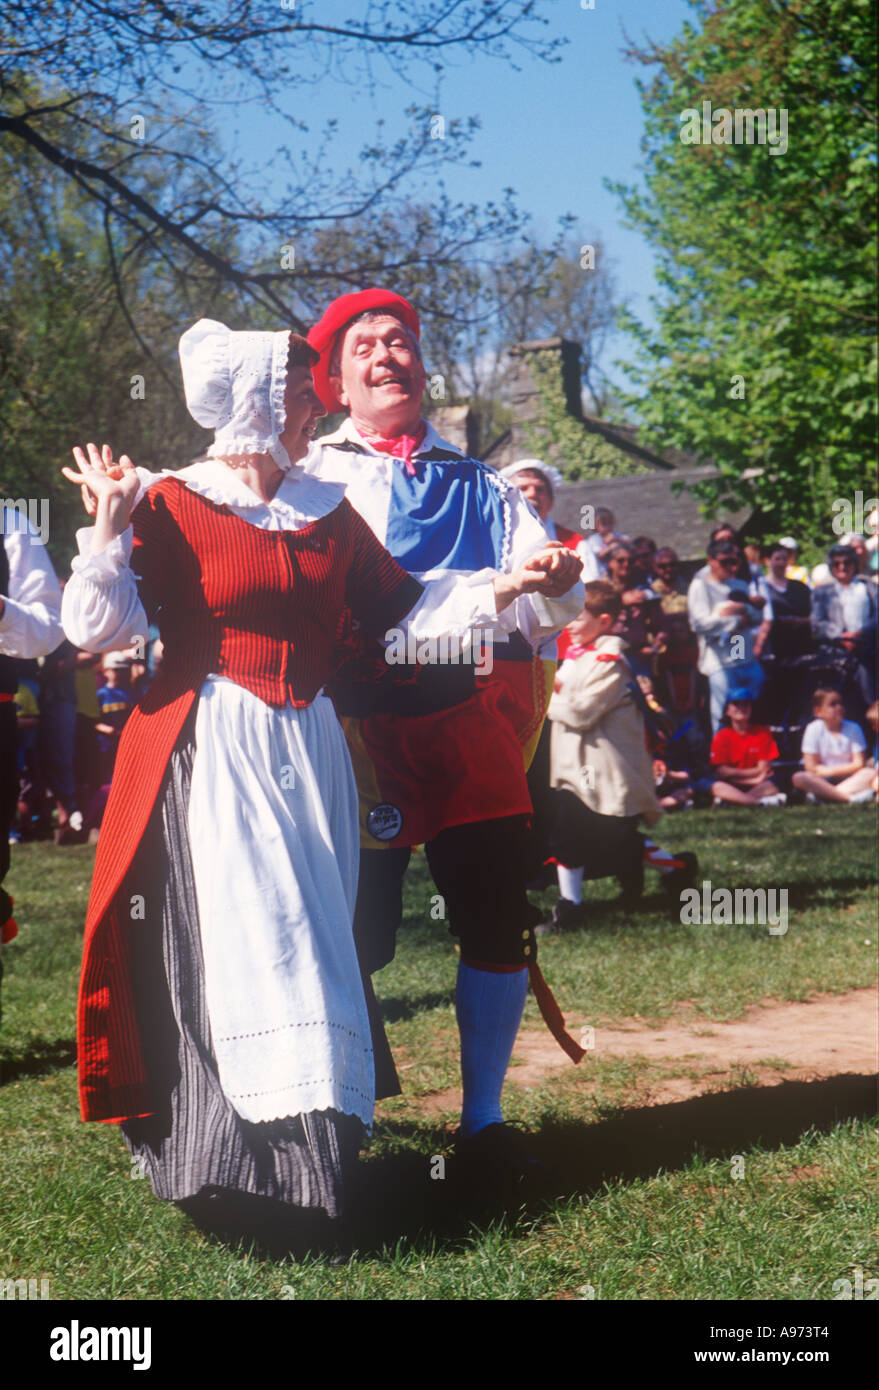 Dancing in gallese Costume National Museum of Welsh Life St Fagans sobborghi di Cardiff Galles del Sud Foto Stock